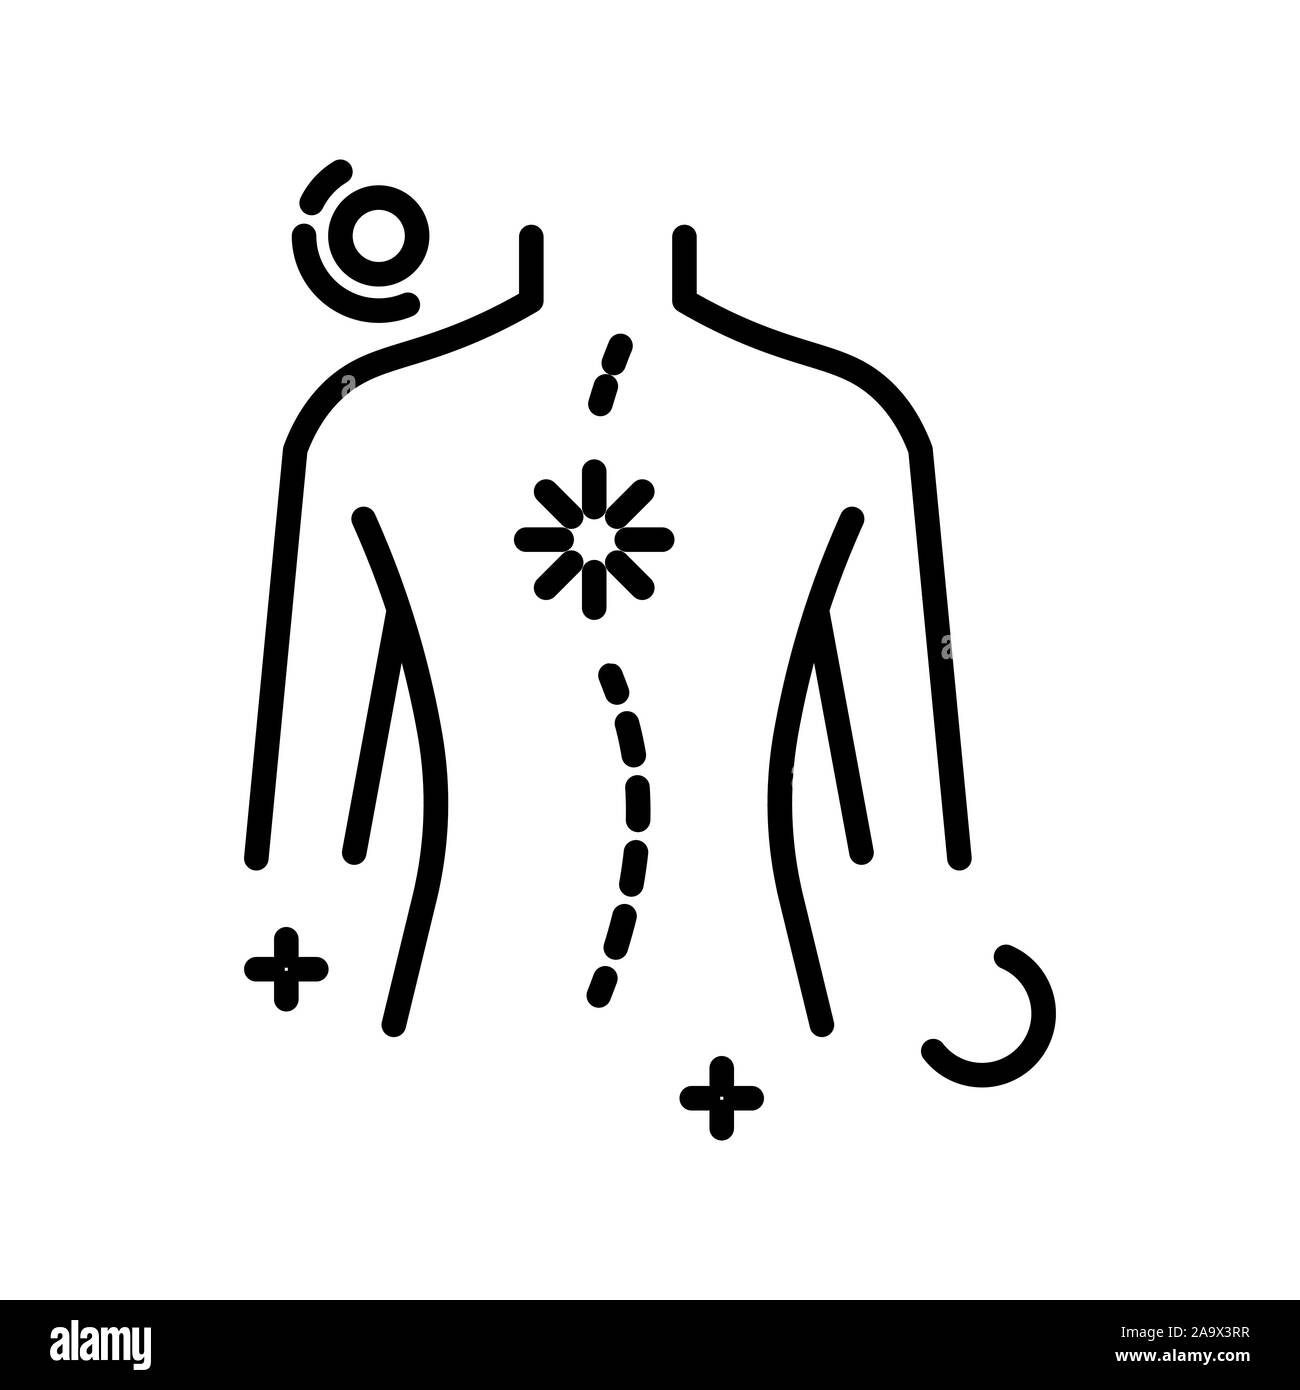 Spine curve, scoliosis disease, male back isolated line icon Stock Vector